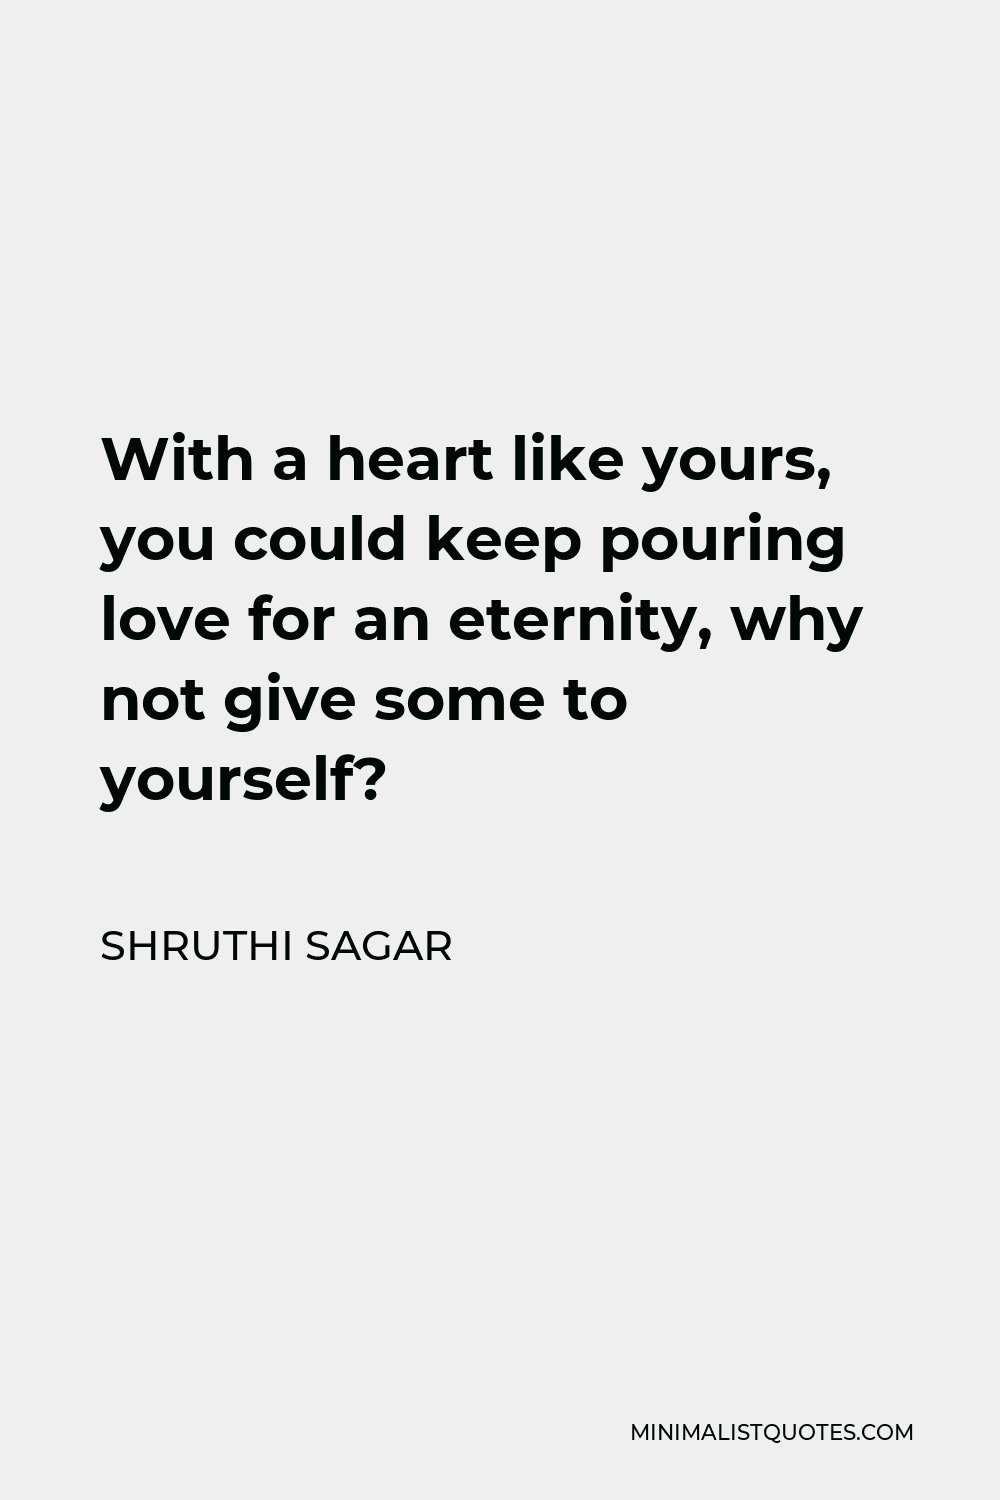 Shruthi Sagar Quote - With a heart like yours, you could keep pouring love for an eternity, why not give some to yourself?